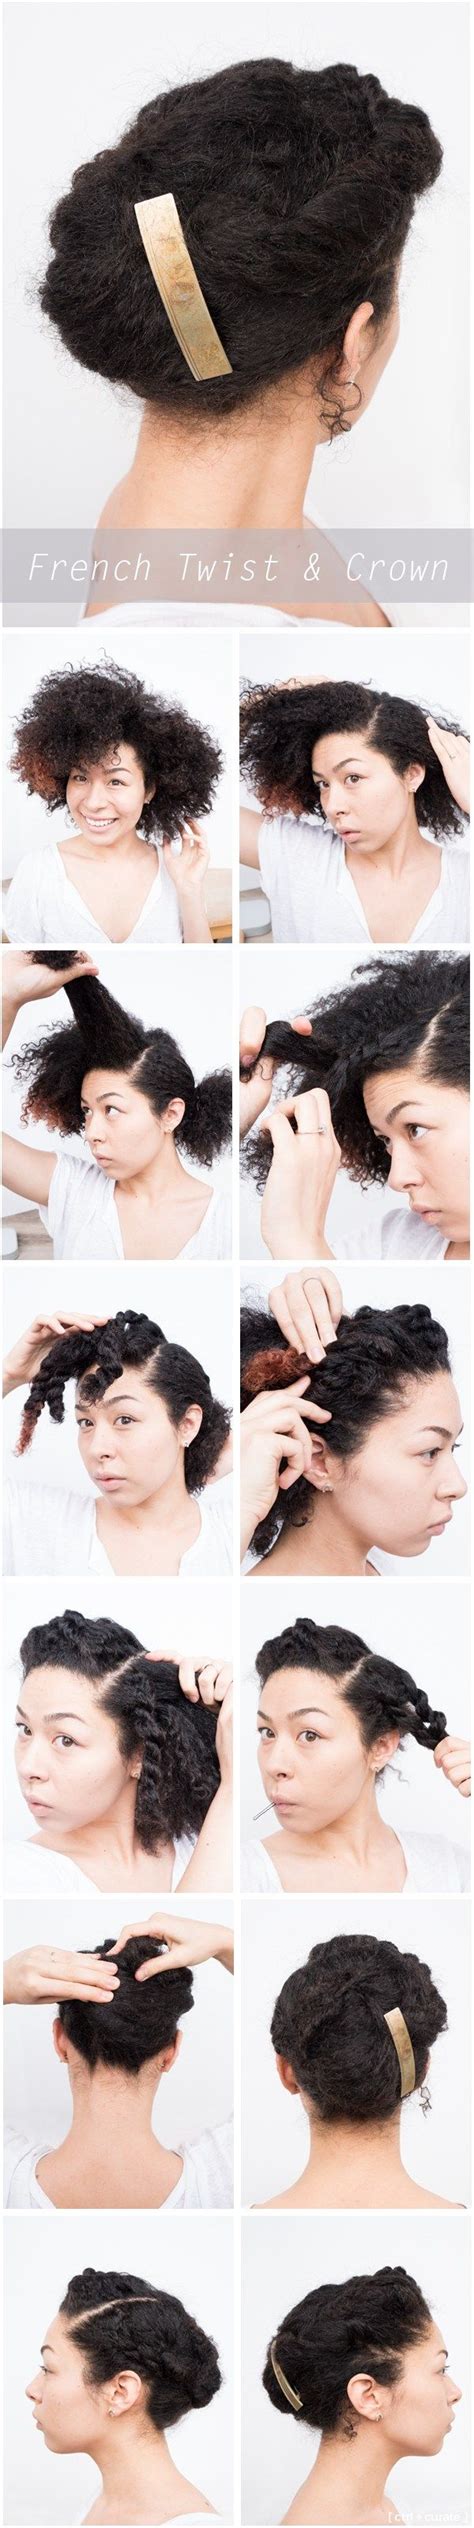 The cap is attached to the top or crown of the head using. Curly Hair Updo: French Twist & Crown | ctrl + curate ...